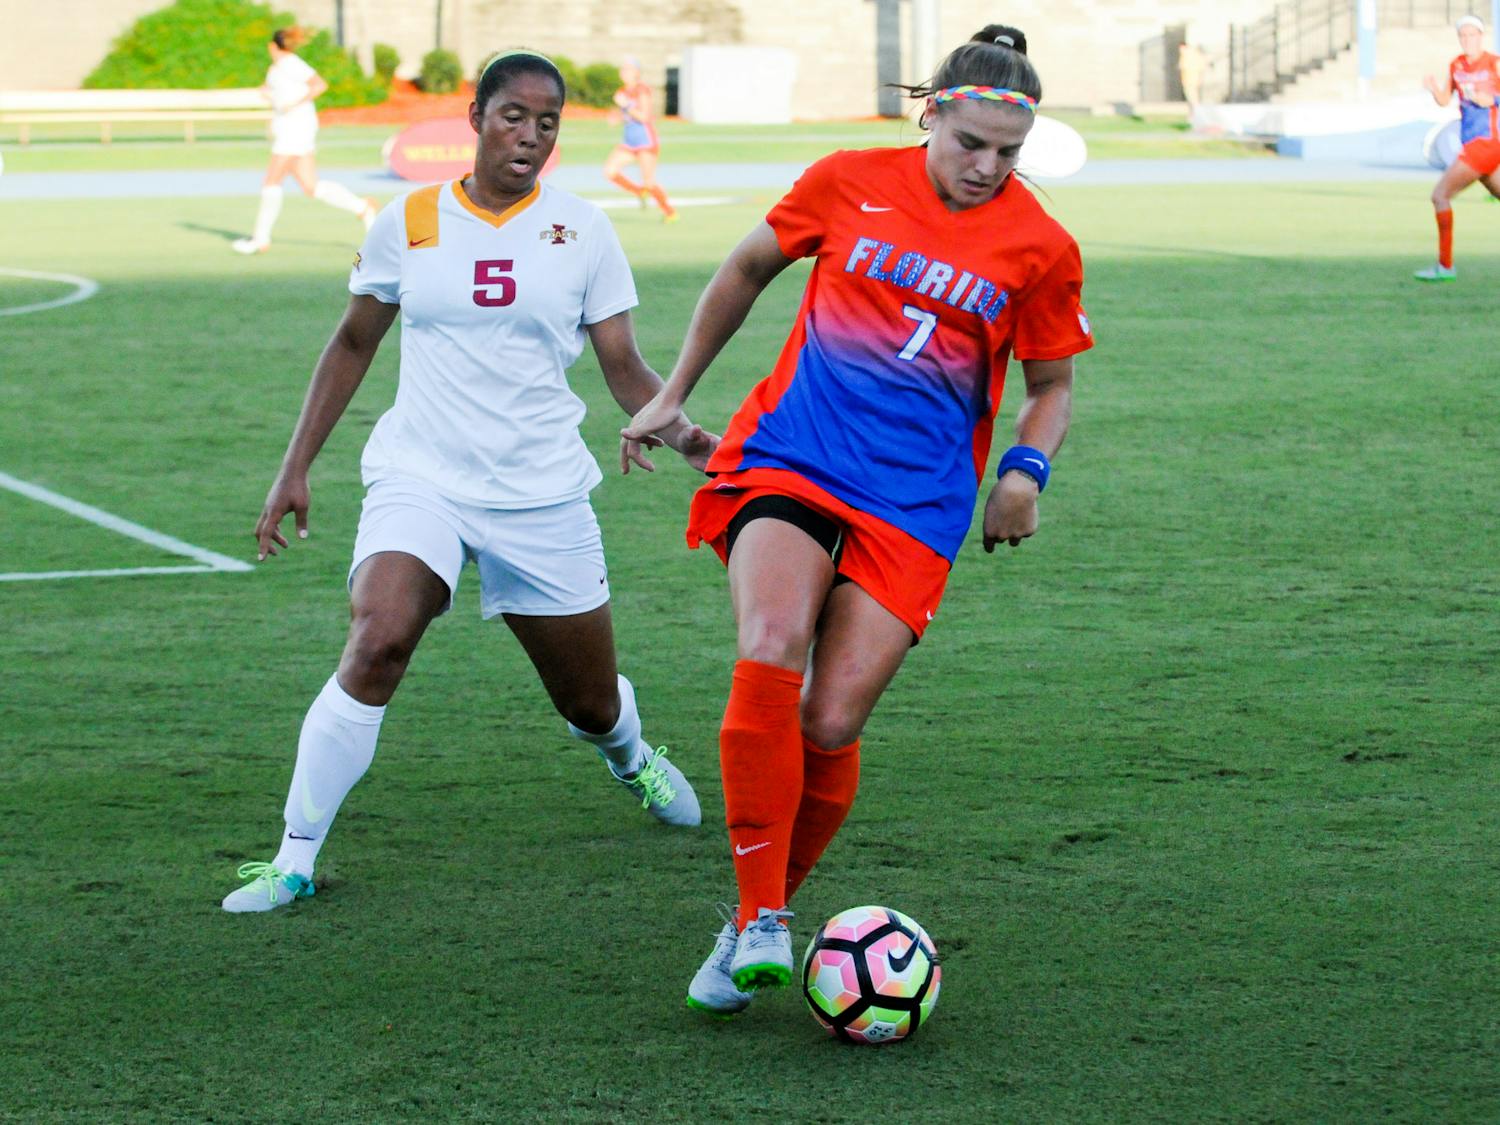 Savannah Jordan dribbles the ball during Florida's 5-2 win over Iowa State on Aug. 19 at James G. Pressly Stadium.